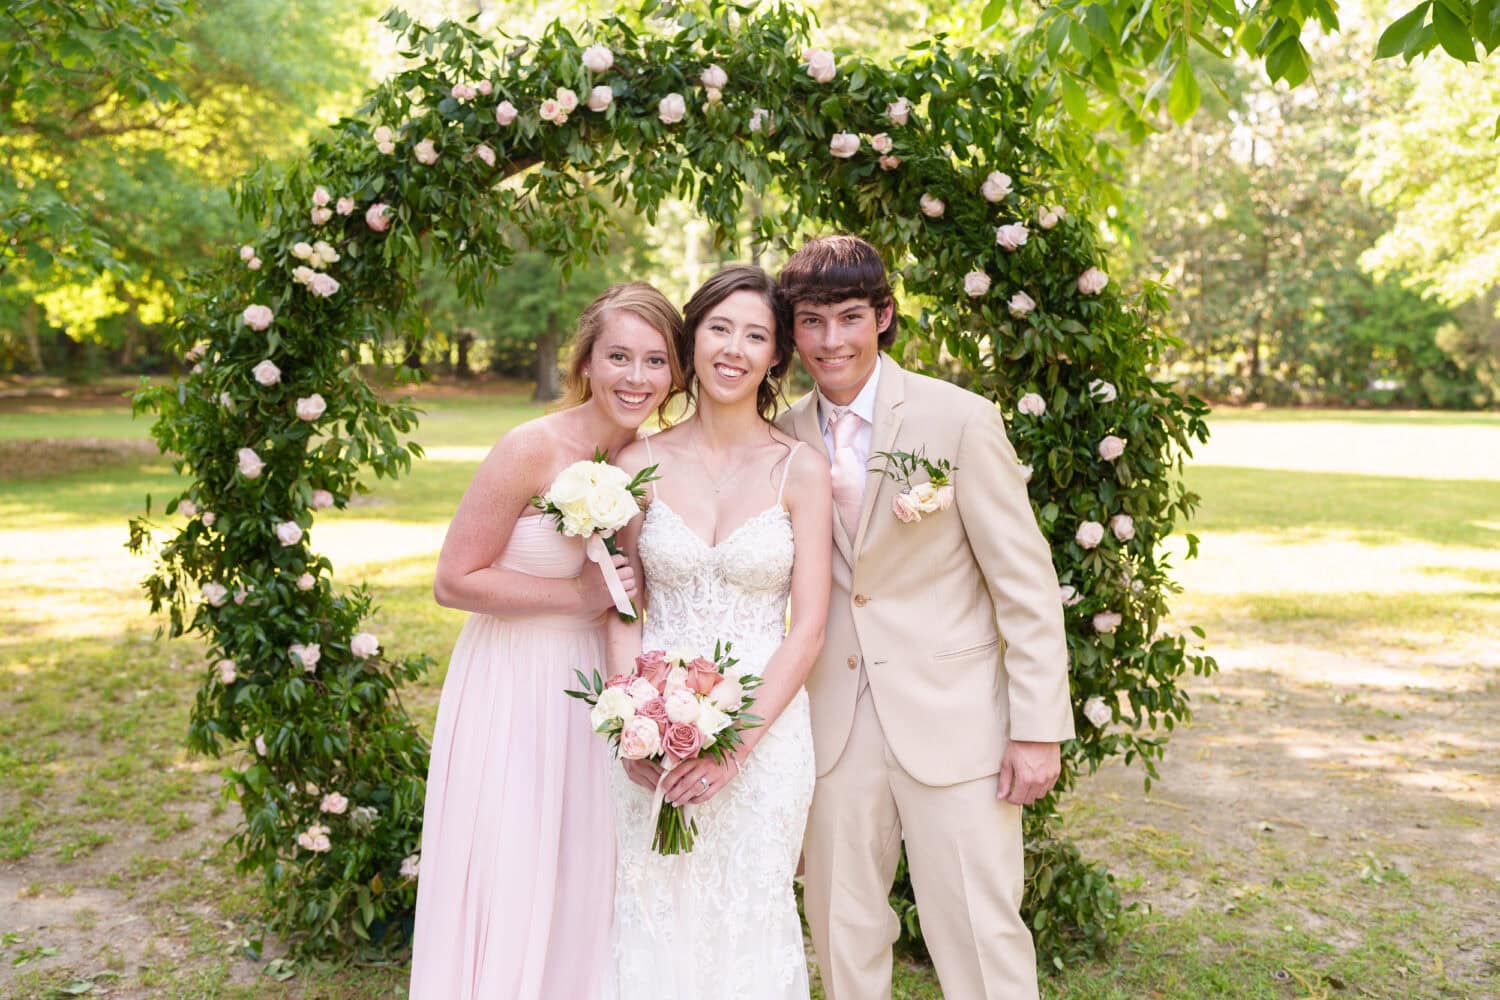 Family pictures after the ceremony - Tanglewood Plantation